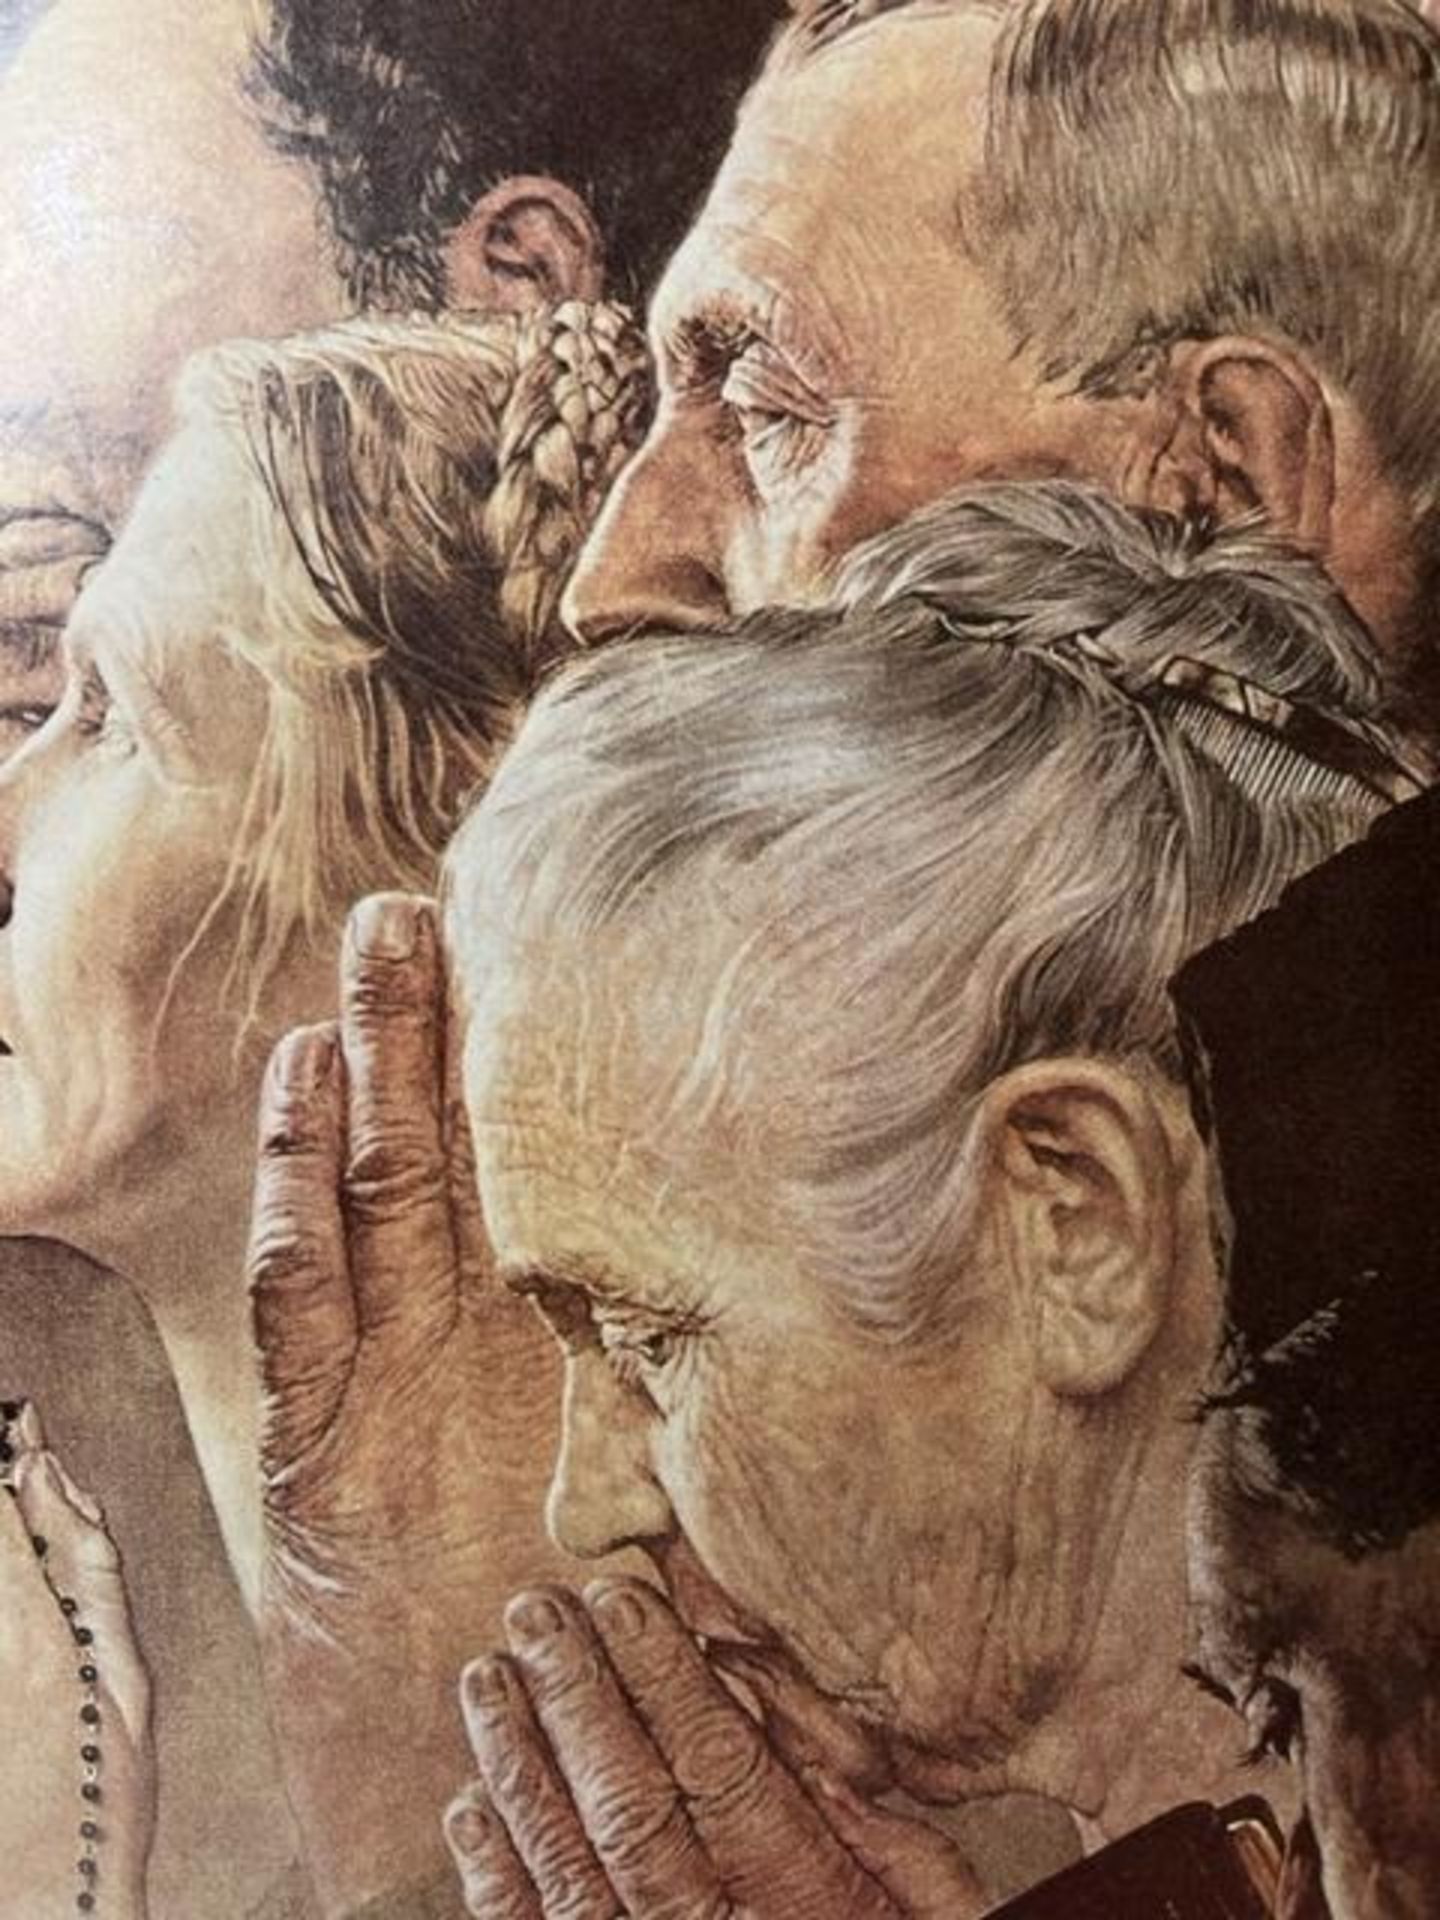 Norman Rockwell "Untitled" Print. - Image 4 of 6